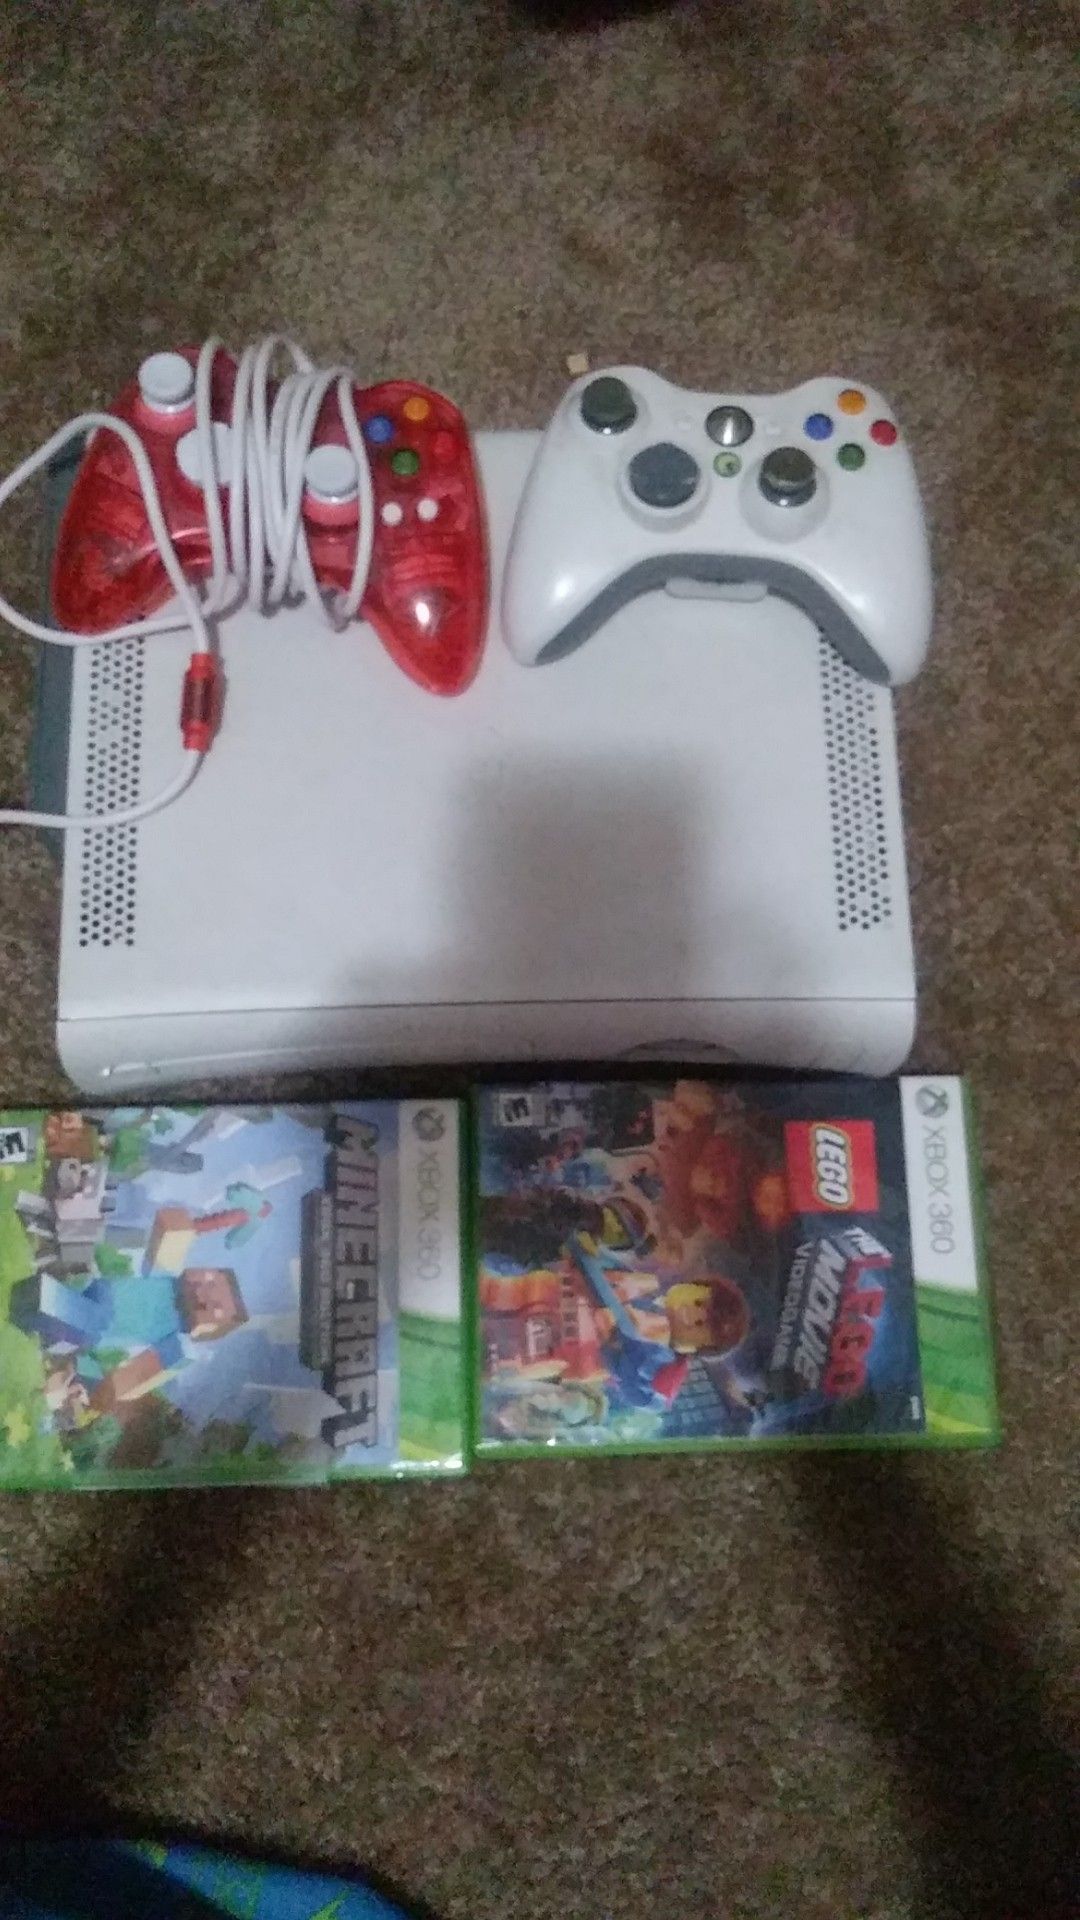 Xbox 360 2 controlers and minecraft and the lego movie game